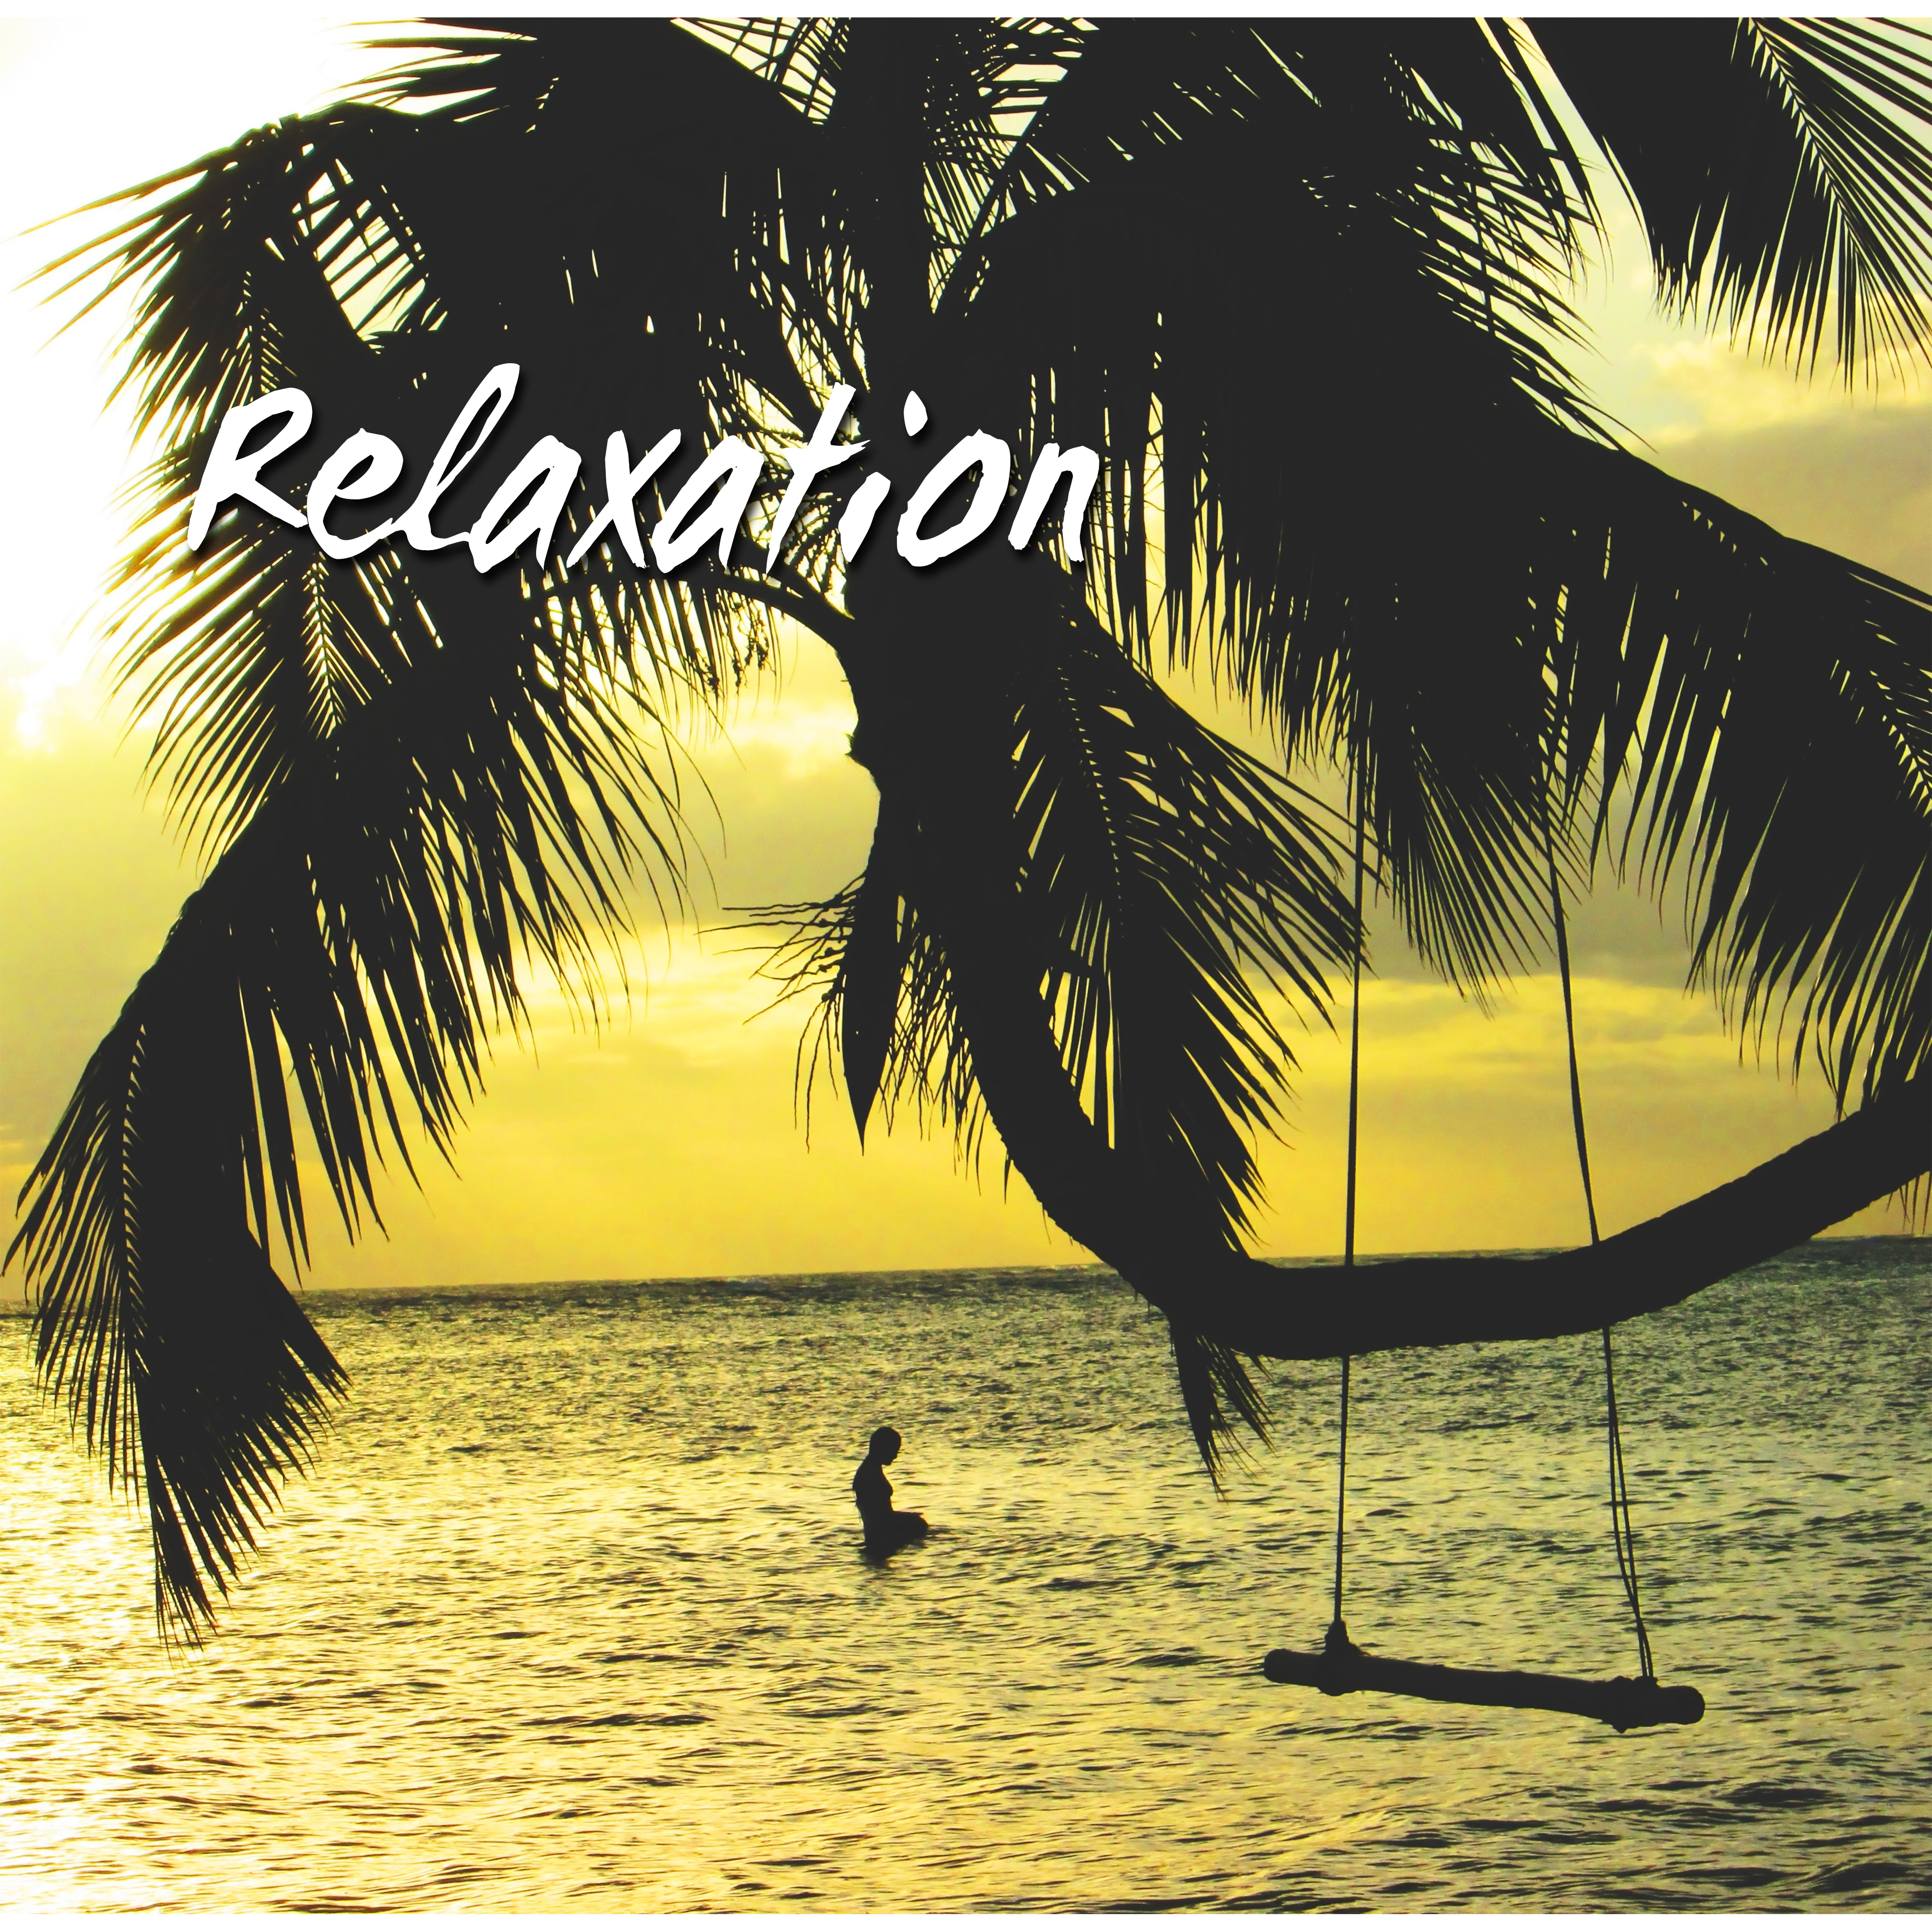 Relaxation - Jazz Music for Dinner, Smooth Background for Dinner Party, Relaxing Songs